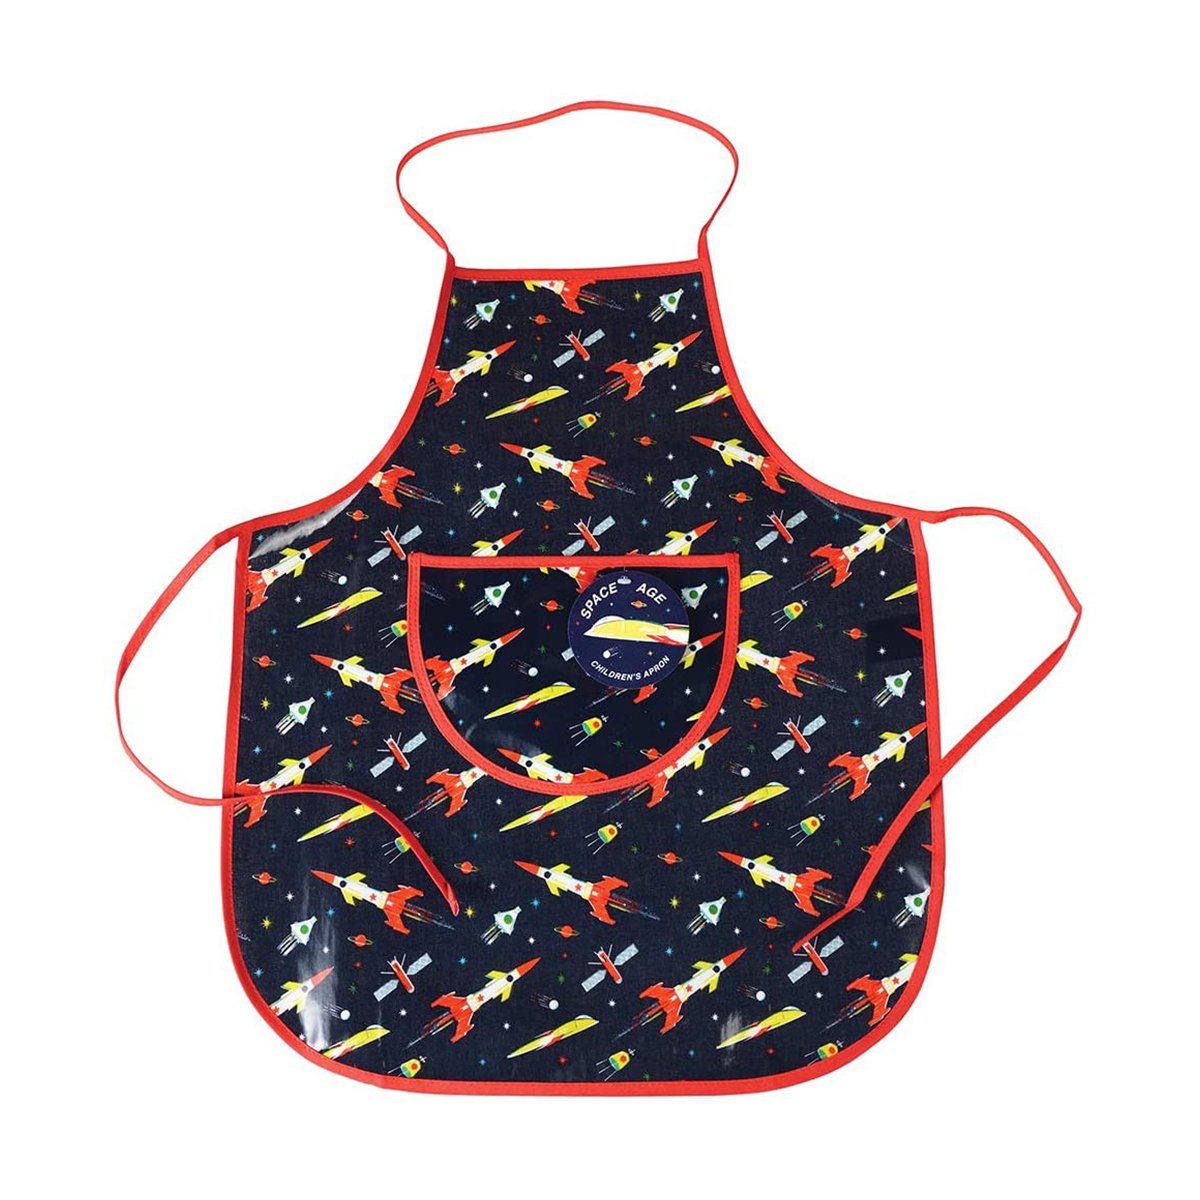 Space Age Kids Apron For Girls & Boys - Indoor Outdoors